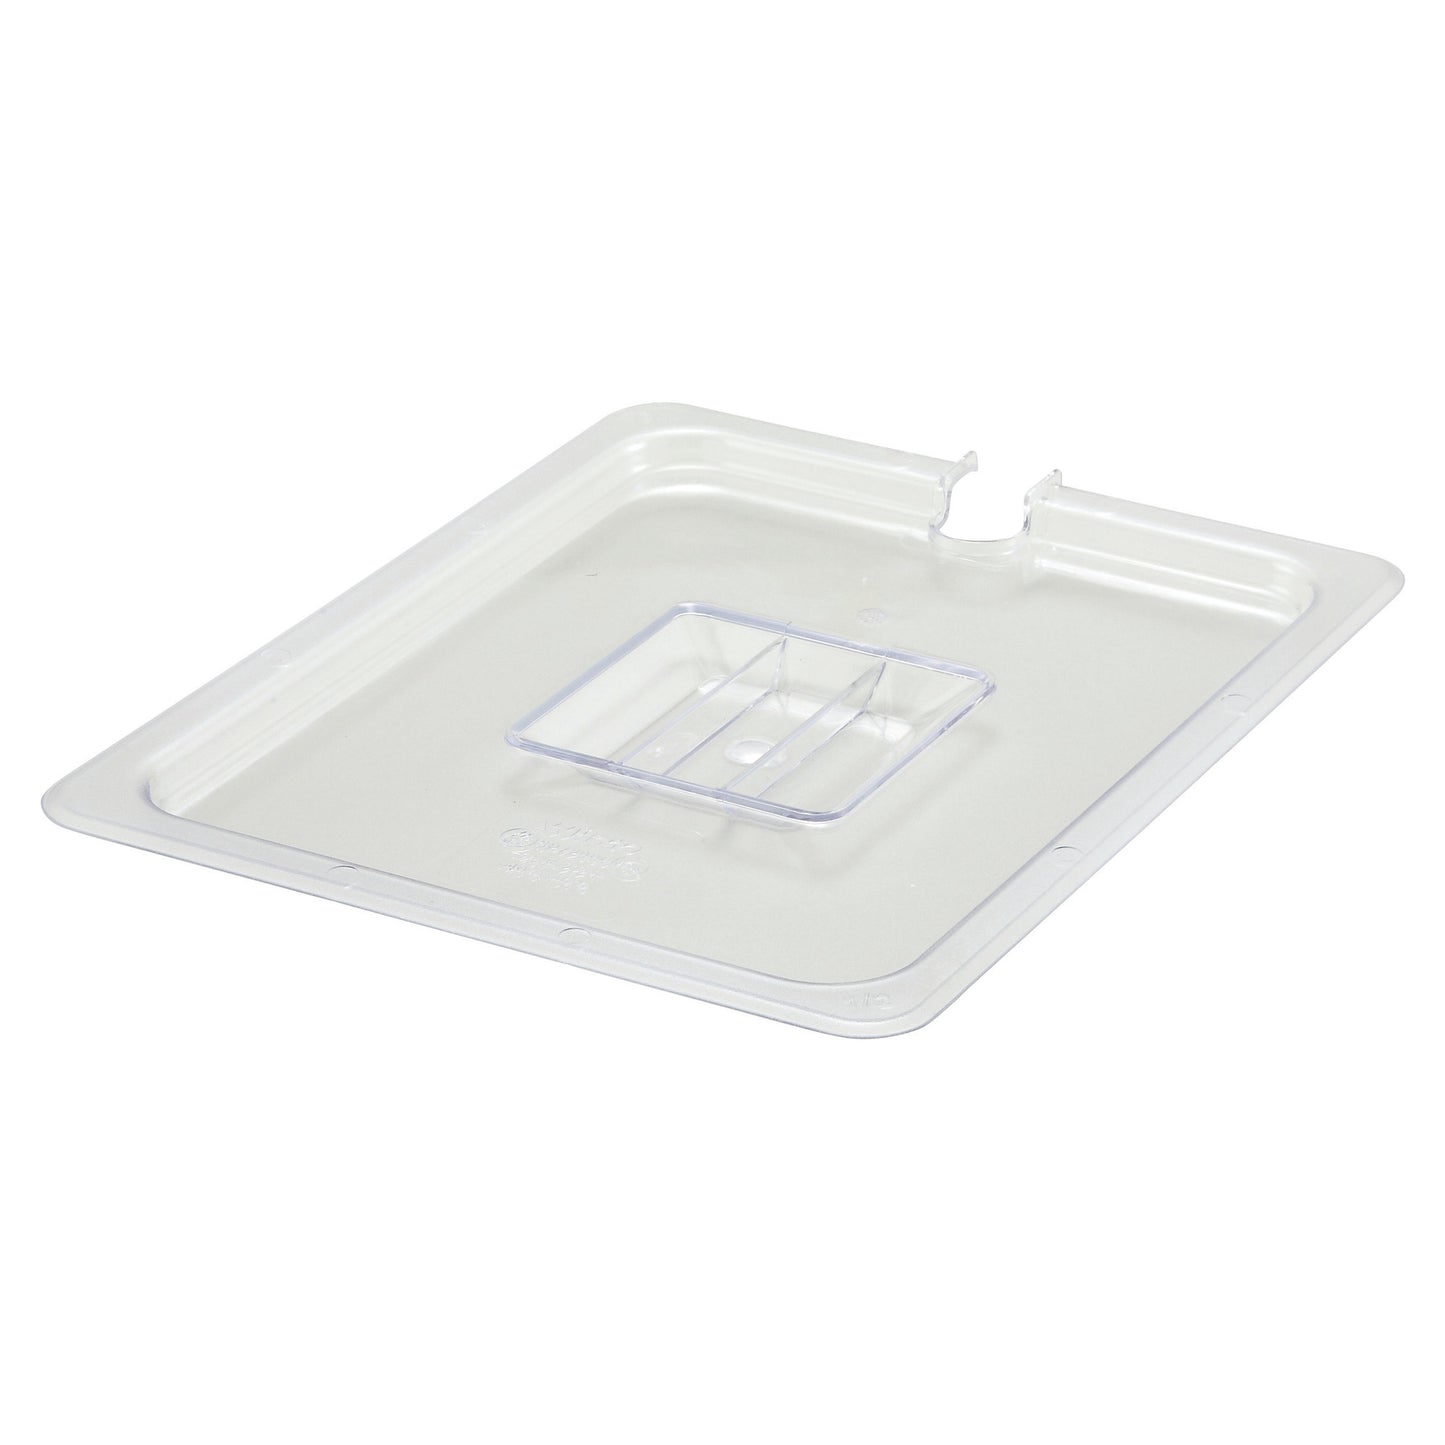 SP7200C - Polycarbonate Food Pan Cover, Slotted - Half (1/2)